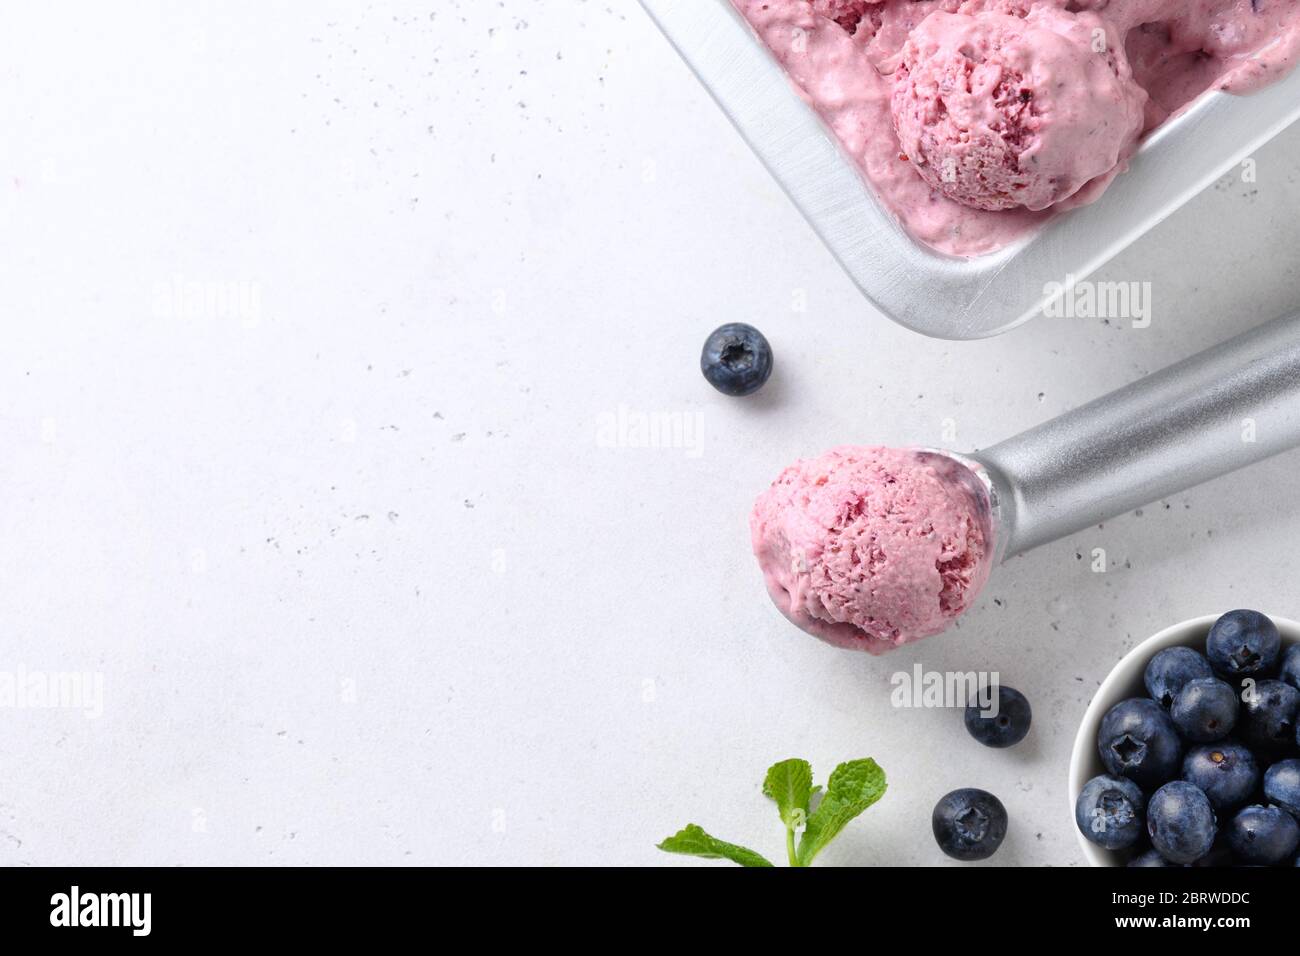 Bluberry and banana homemade ice cream or sorbet ball in scoop on white background. Close up. Space for text. Stock Photo